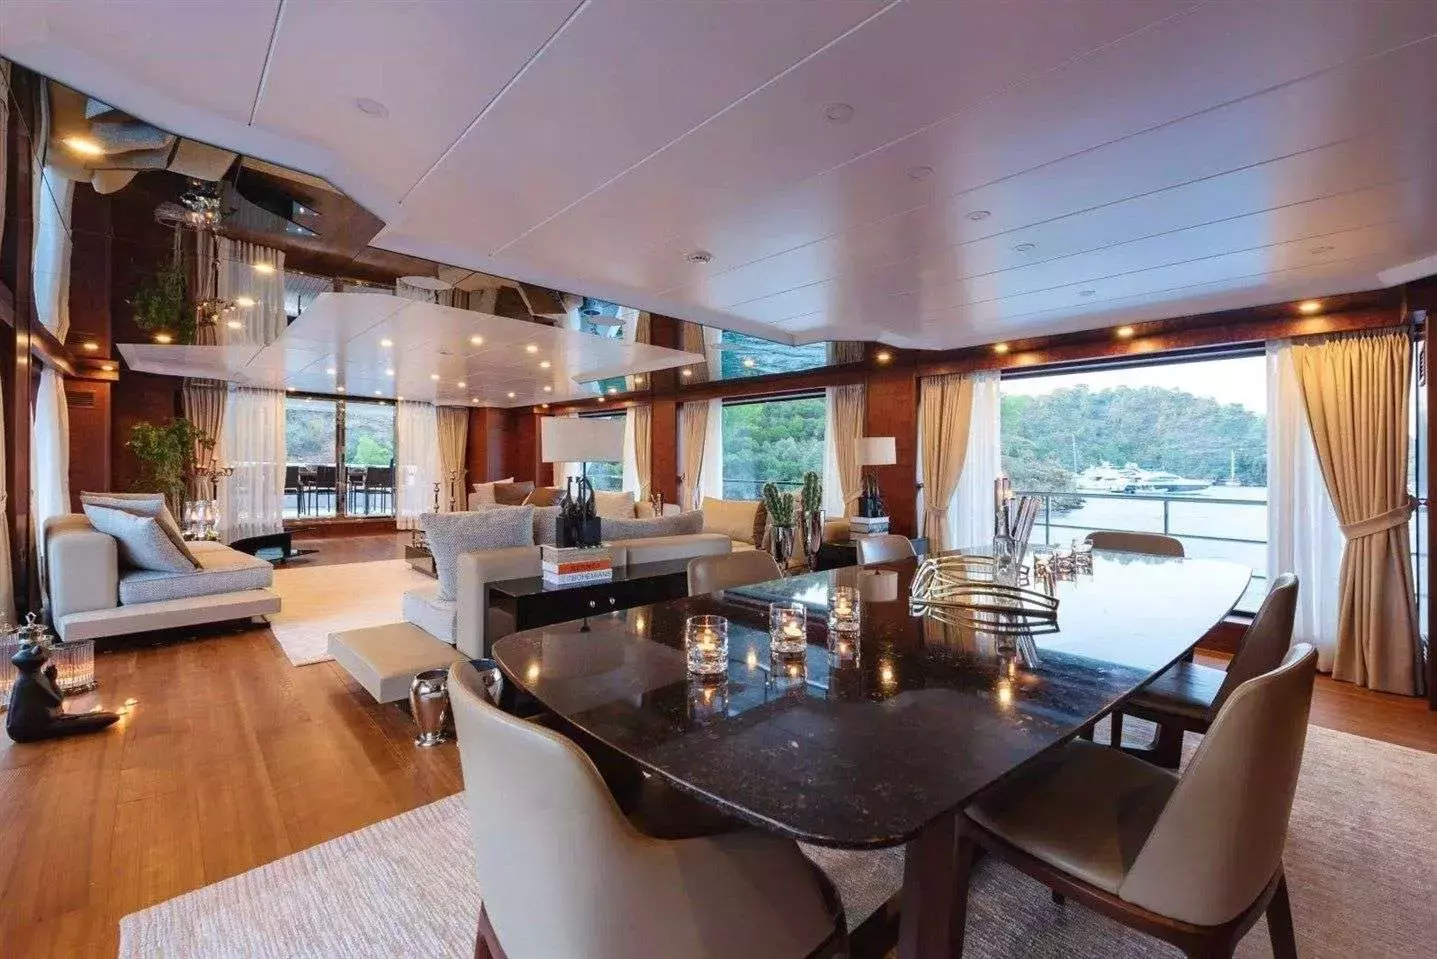 Adamaris by Mengi Yay - Special Offer for a private Superyacht Rental in Fethiye with a crew